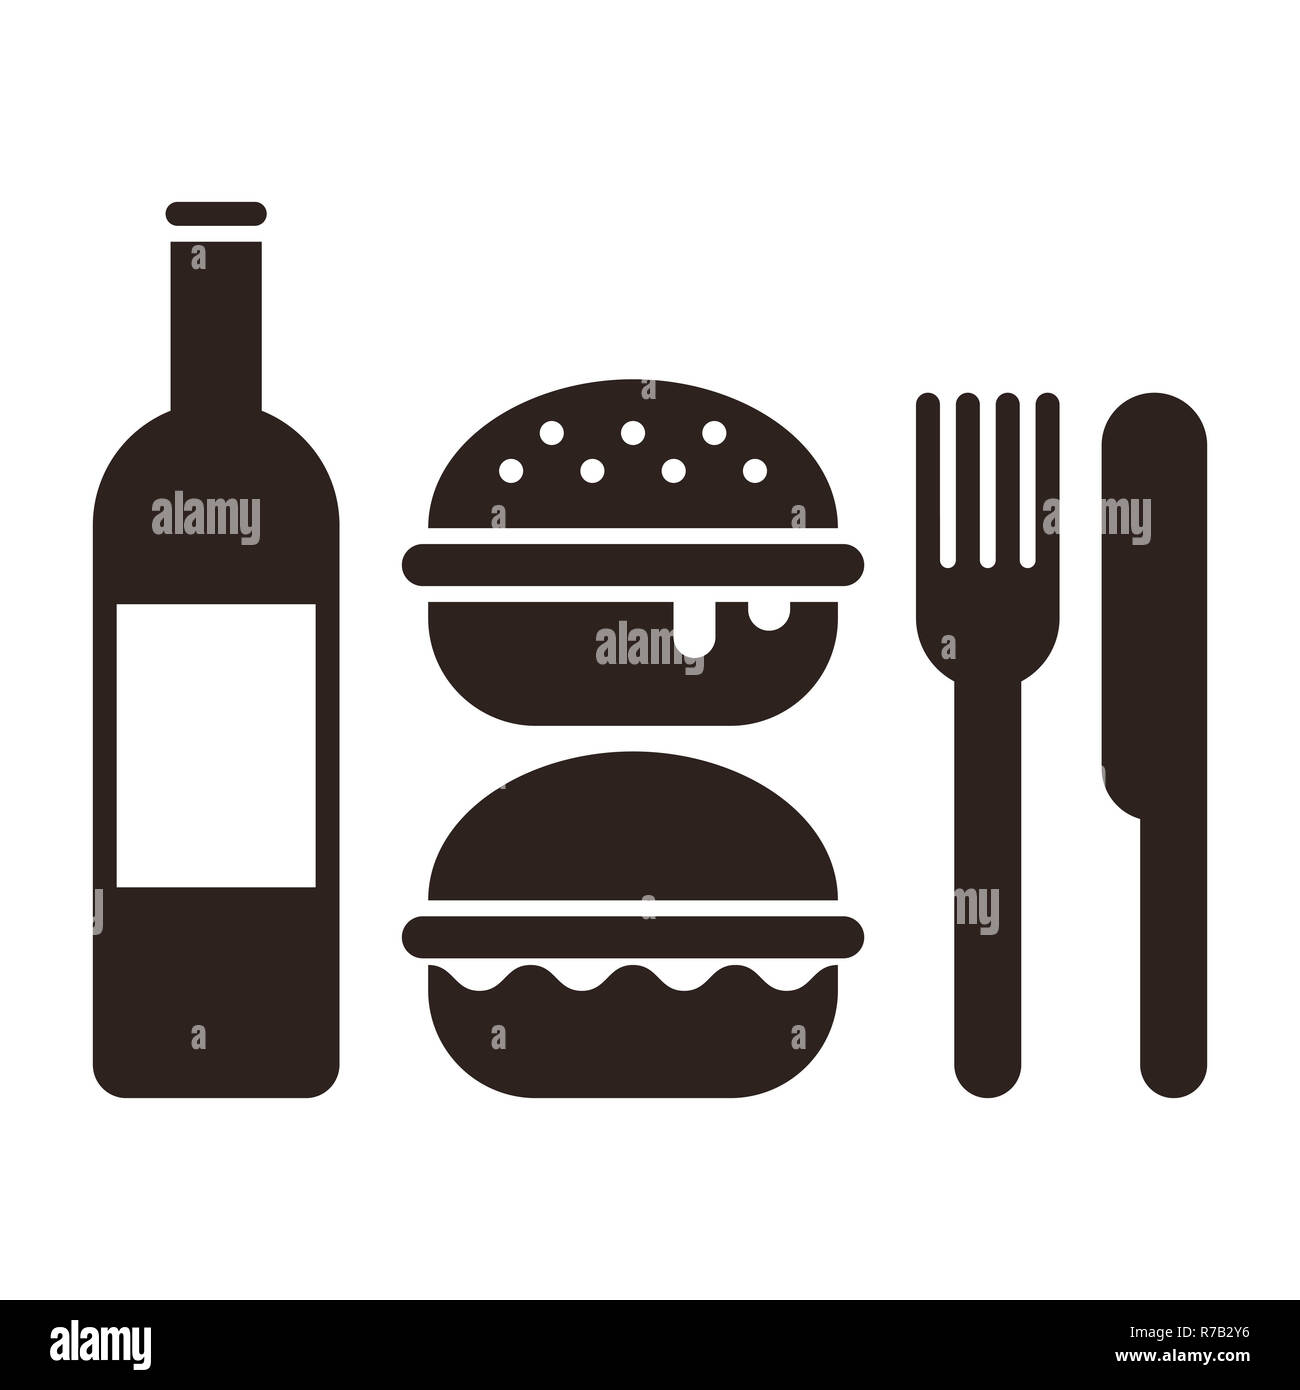 Burgers, knife, fork and bottle. Fast food symbol isolated on white background Stock Photo